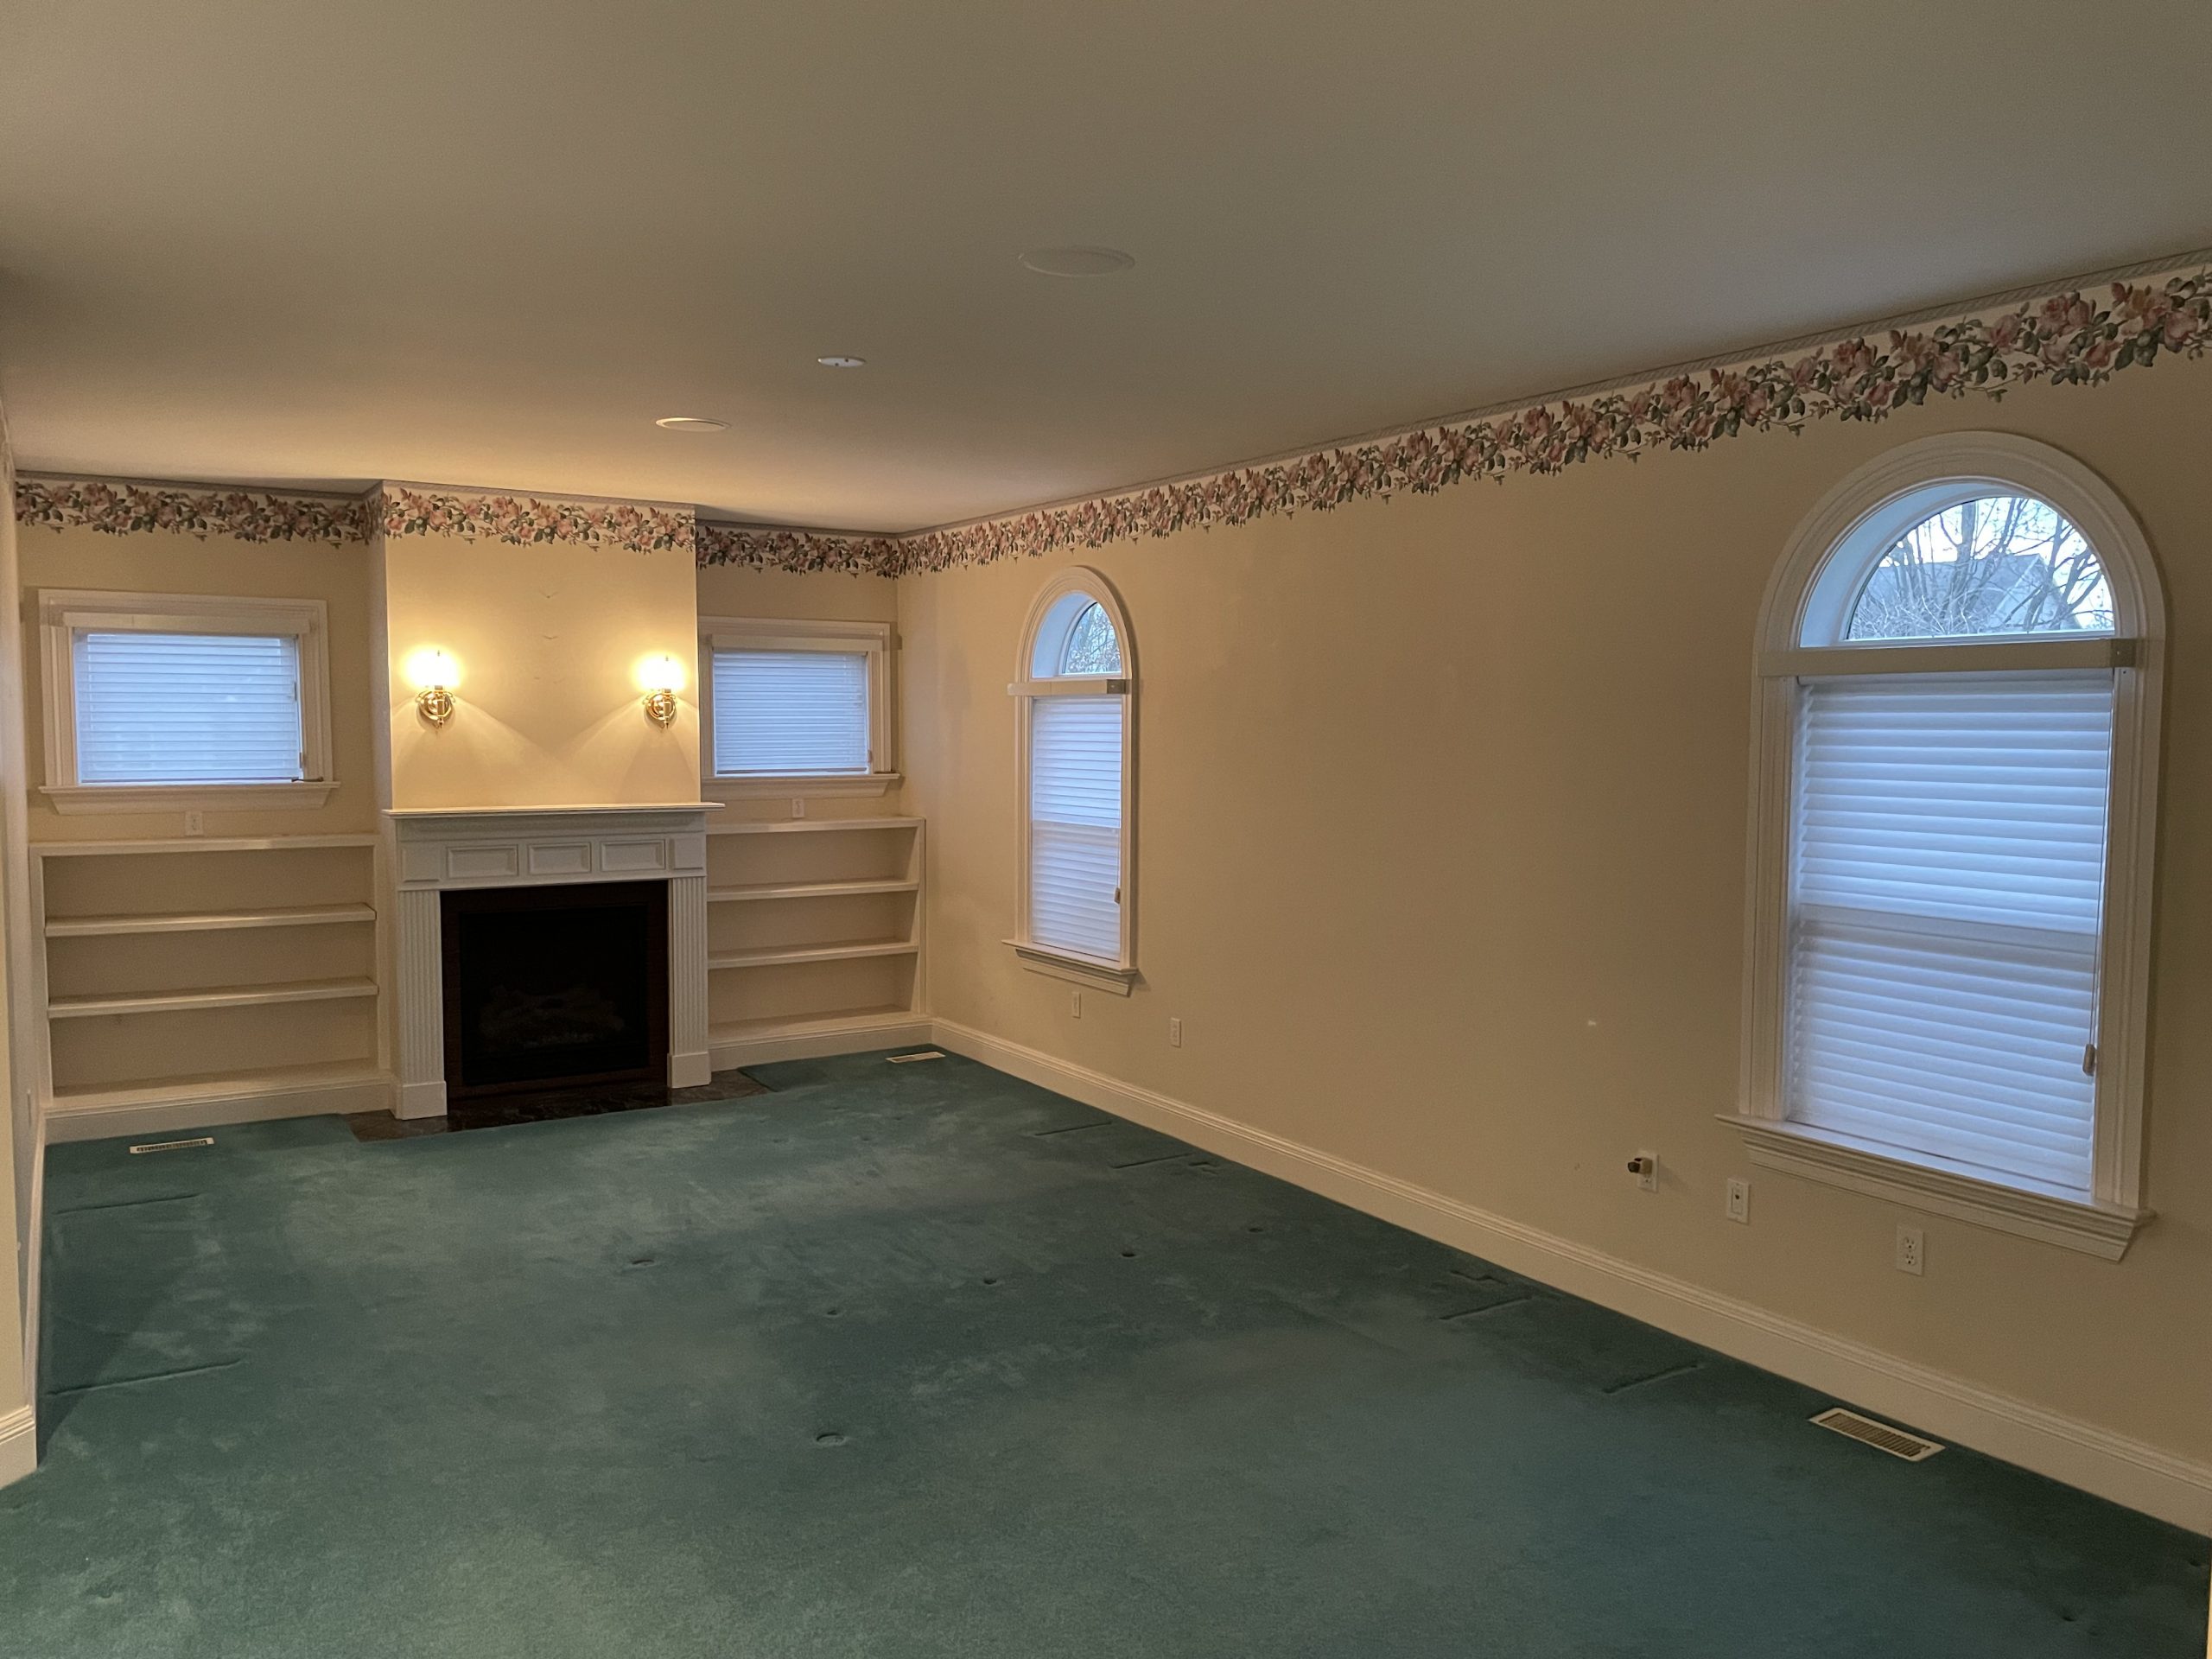 Residential Interior in Mechanicsburg, PA, before painting project by CertaPro Painters of Harrisburg, PA